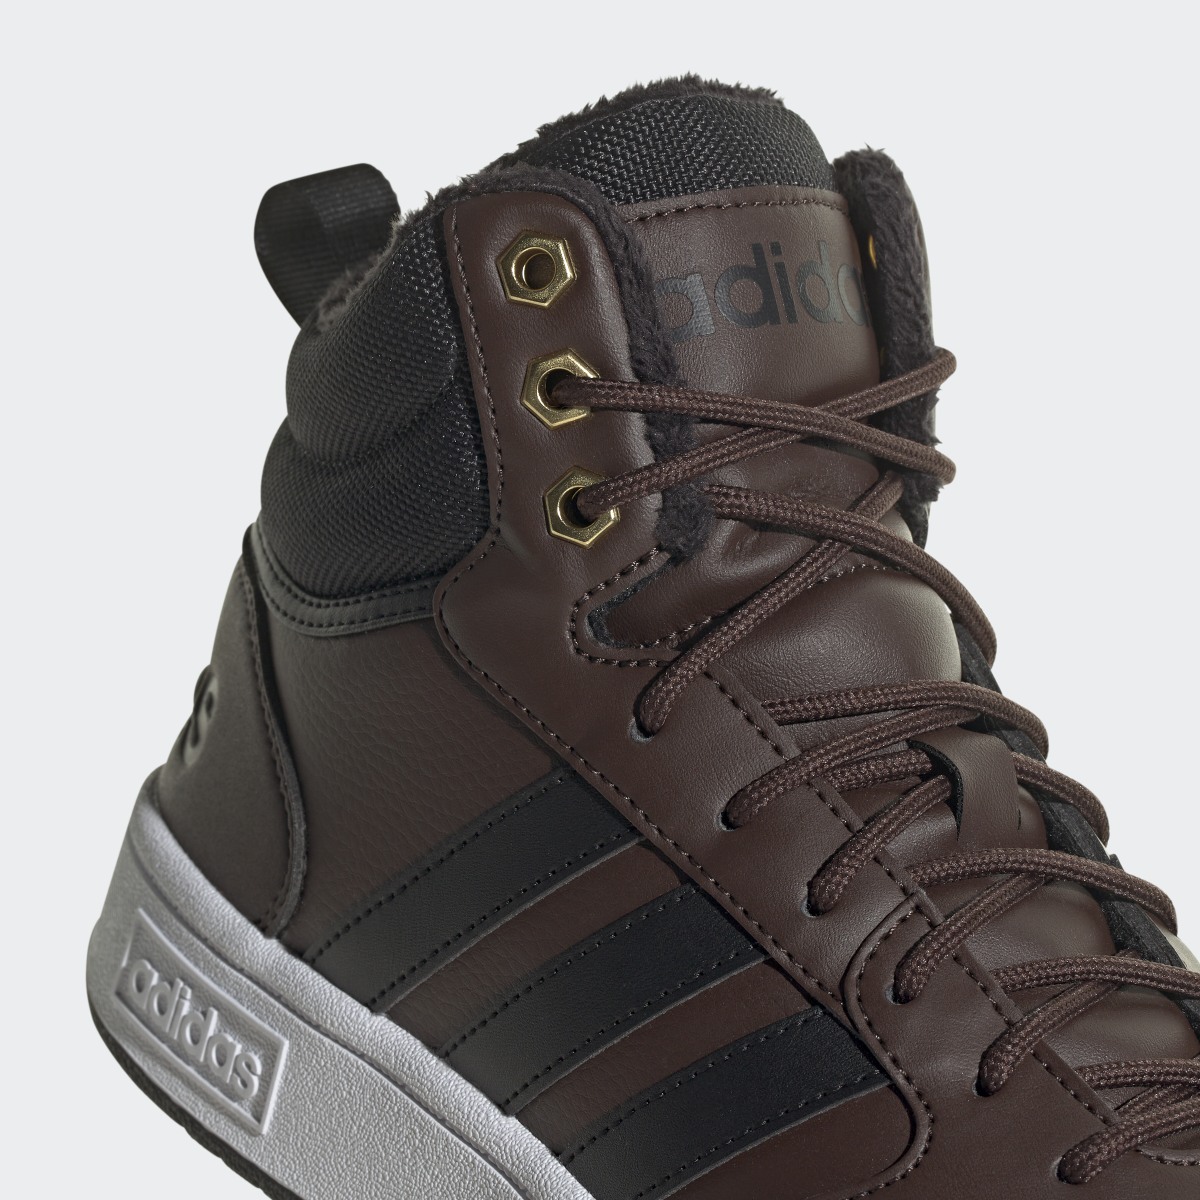 Adidas Hoops 3.0 Mid Lifestyle Basketball Classic Fur Lining Winterized Schuh. 9